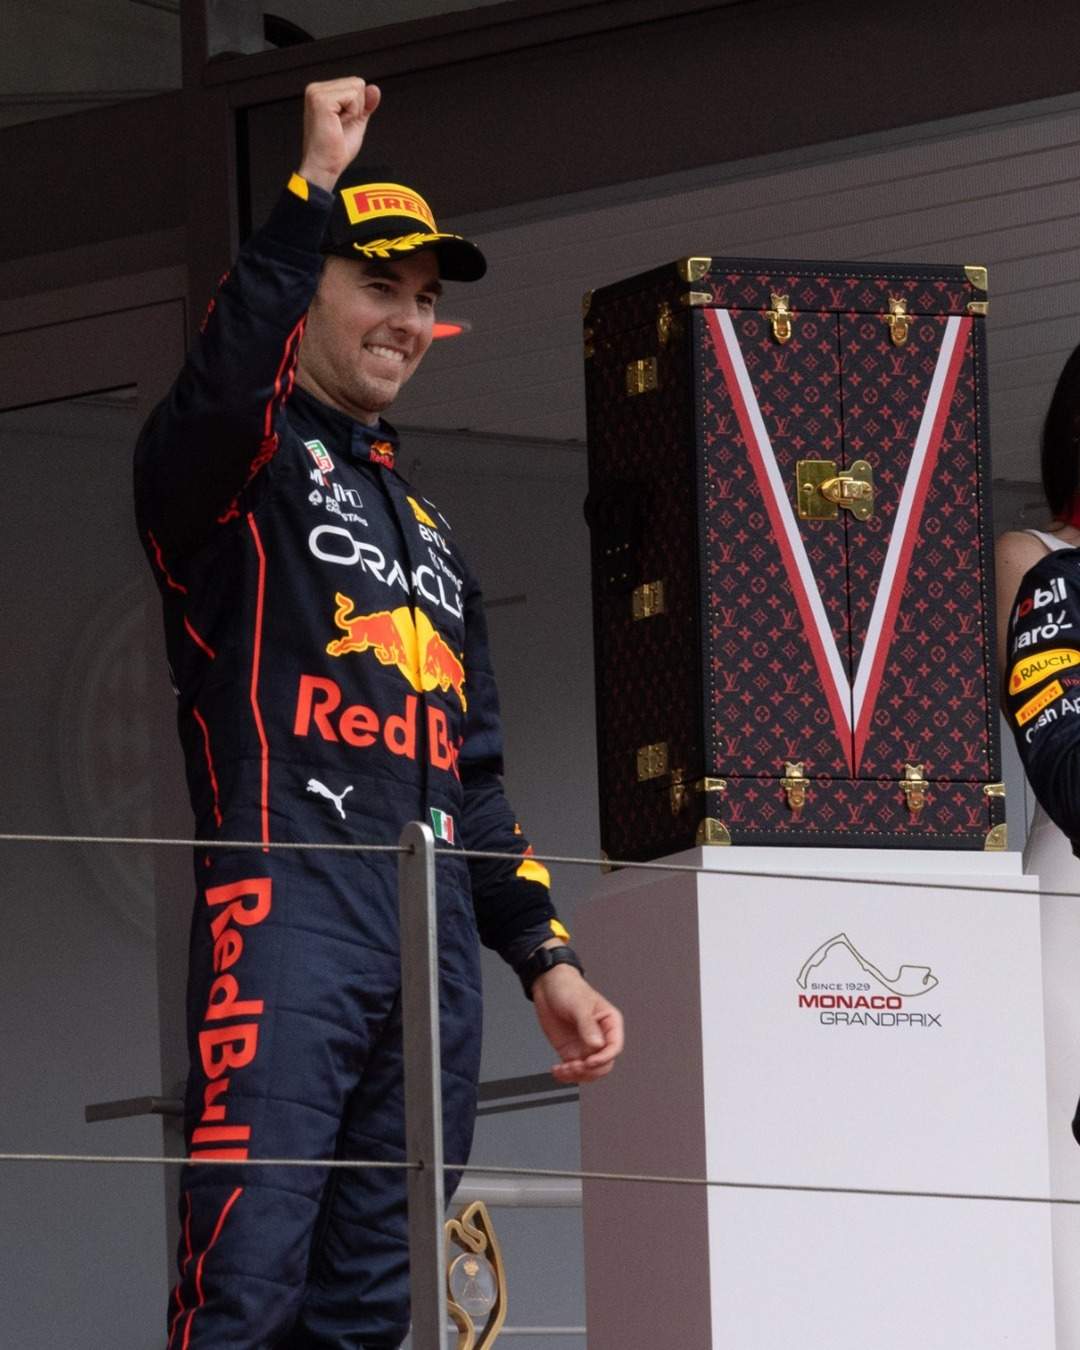 Louis Vuitton has designed the official trophy case for the